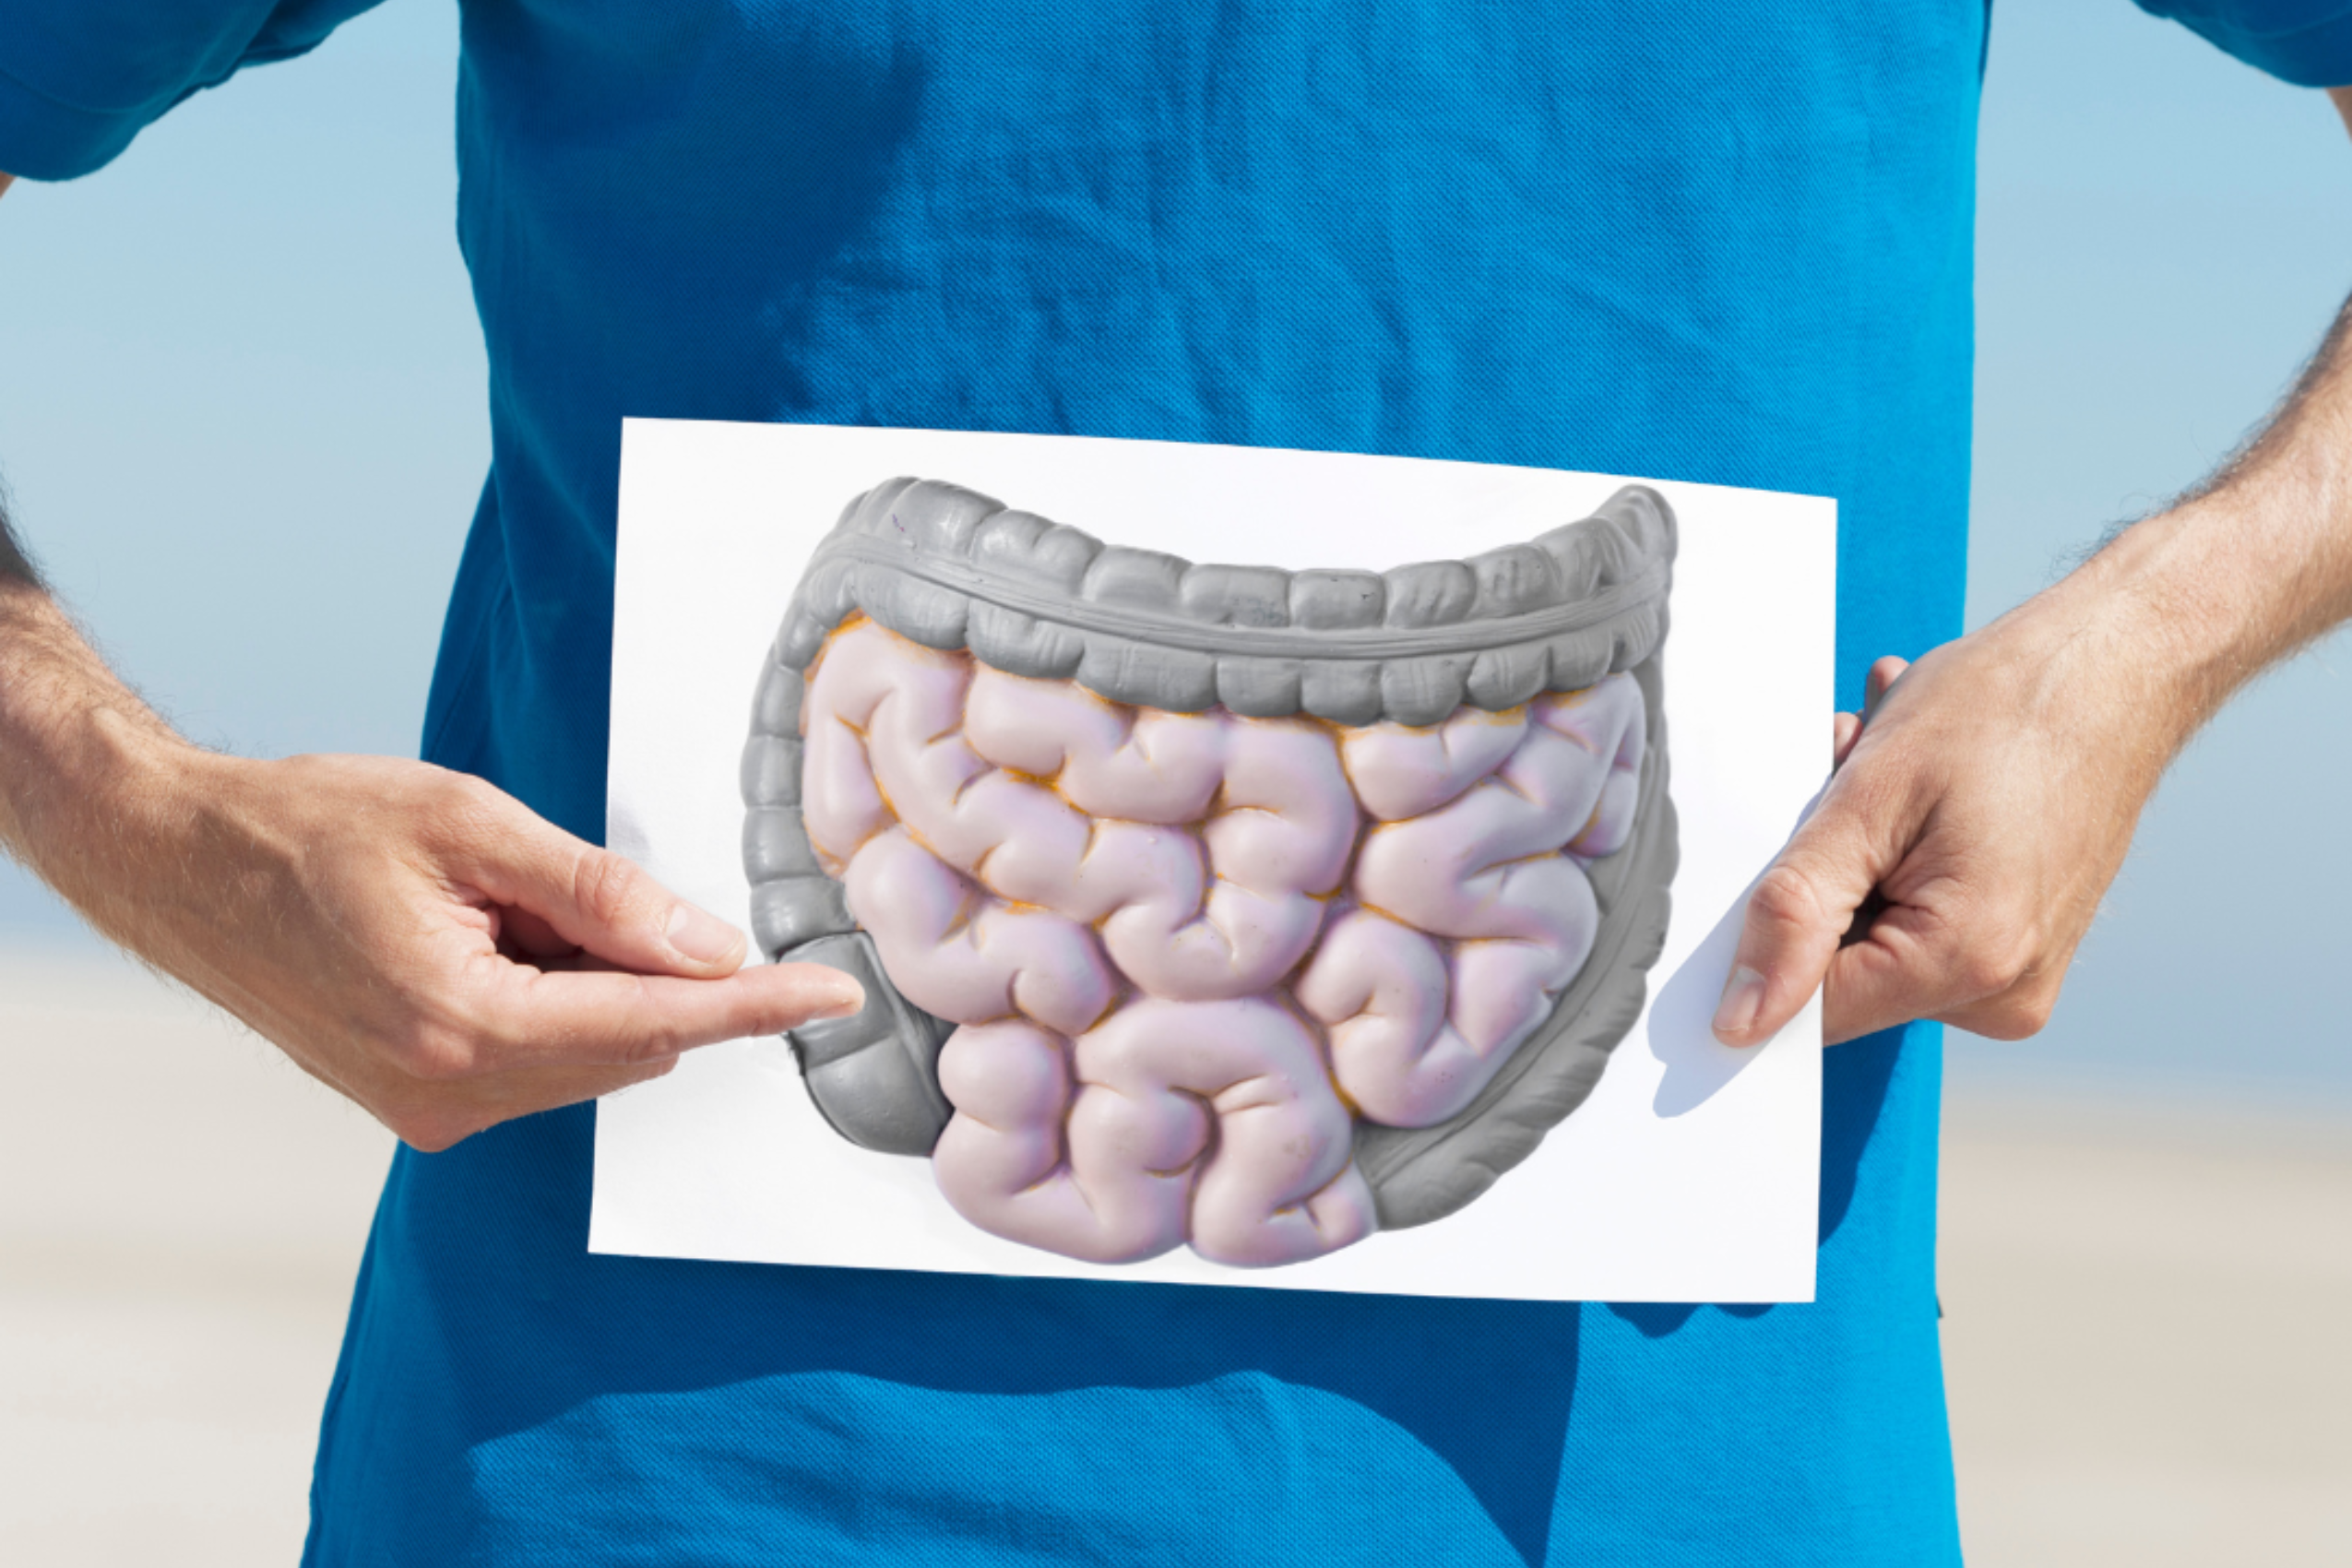 person in blue shirt holding image of intestines over bellly